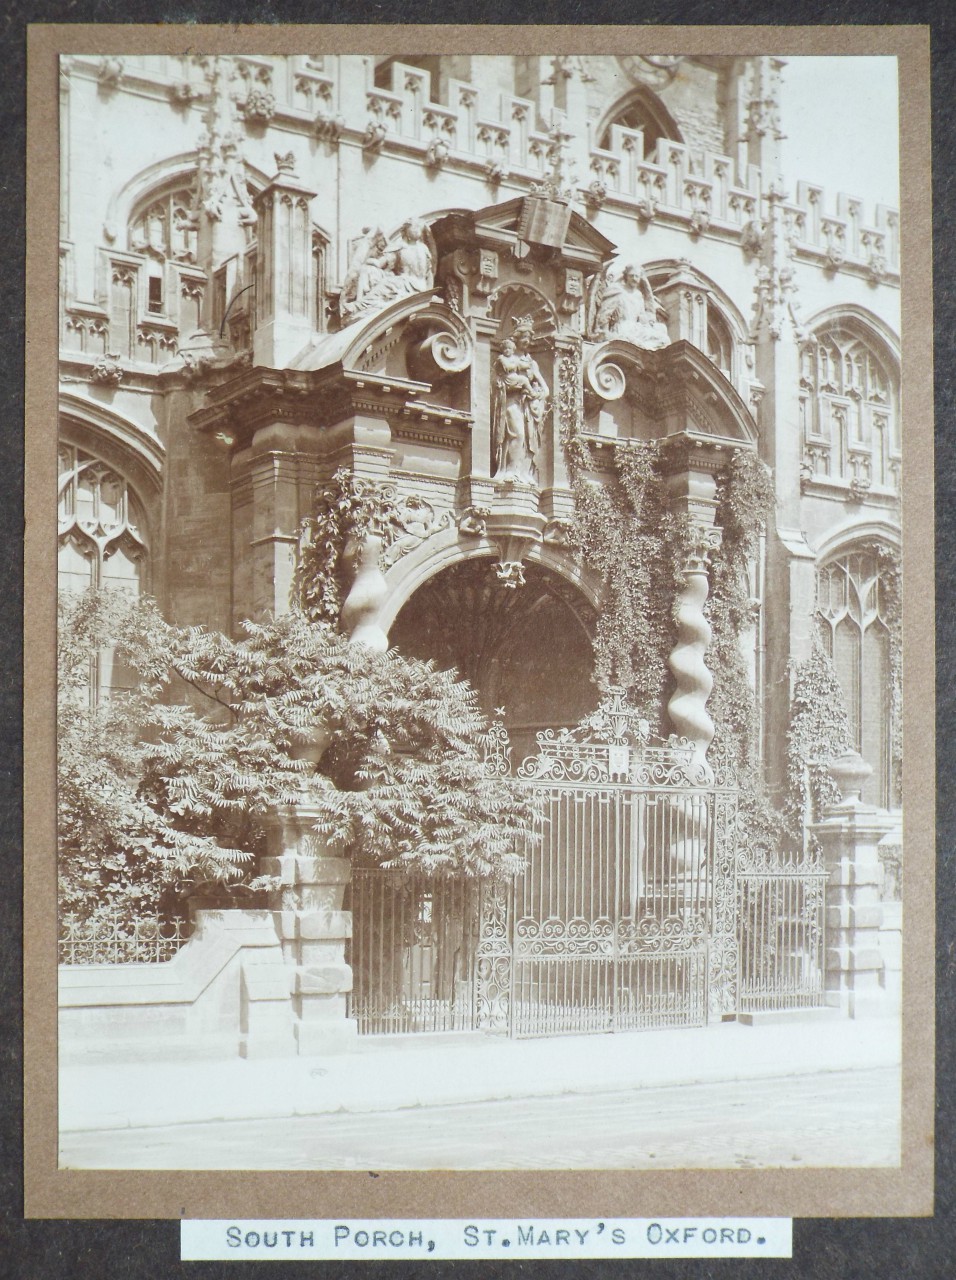 Photograph - South Porch, St. Mary's Oxford.